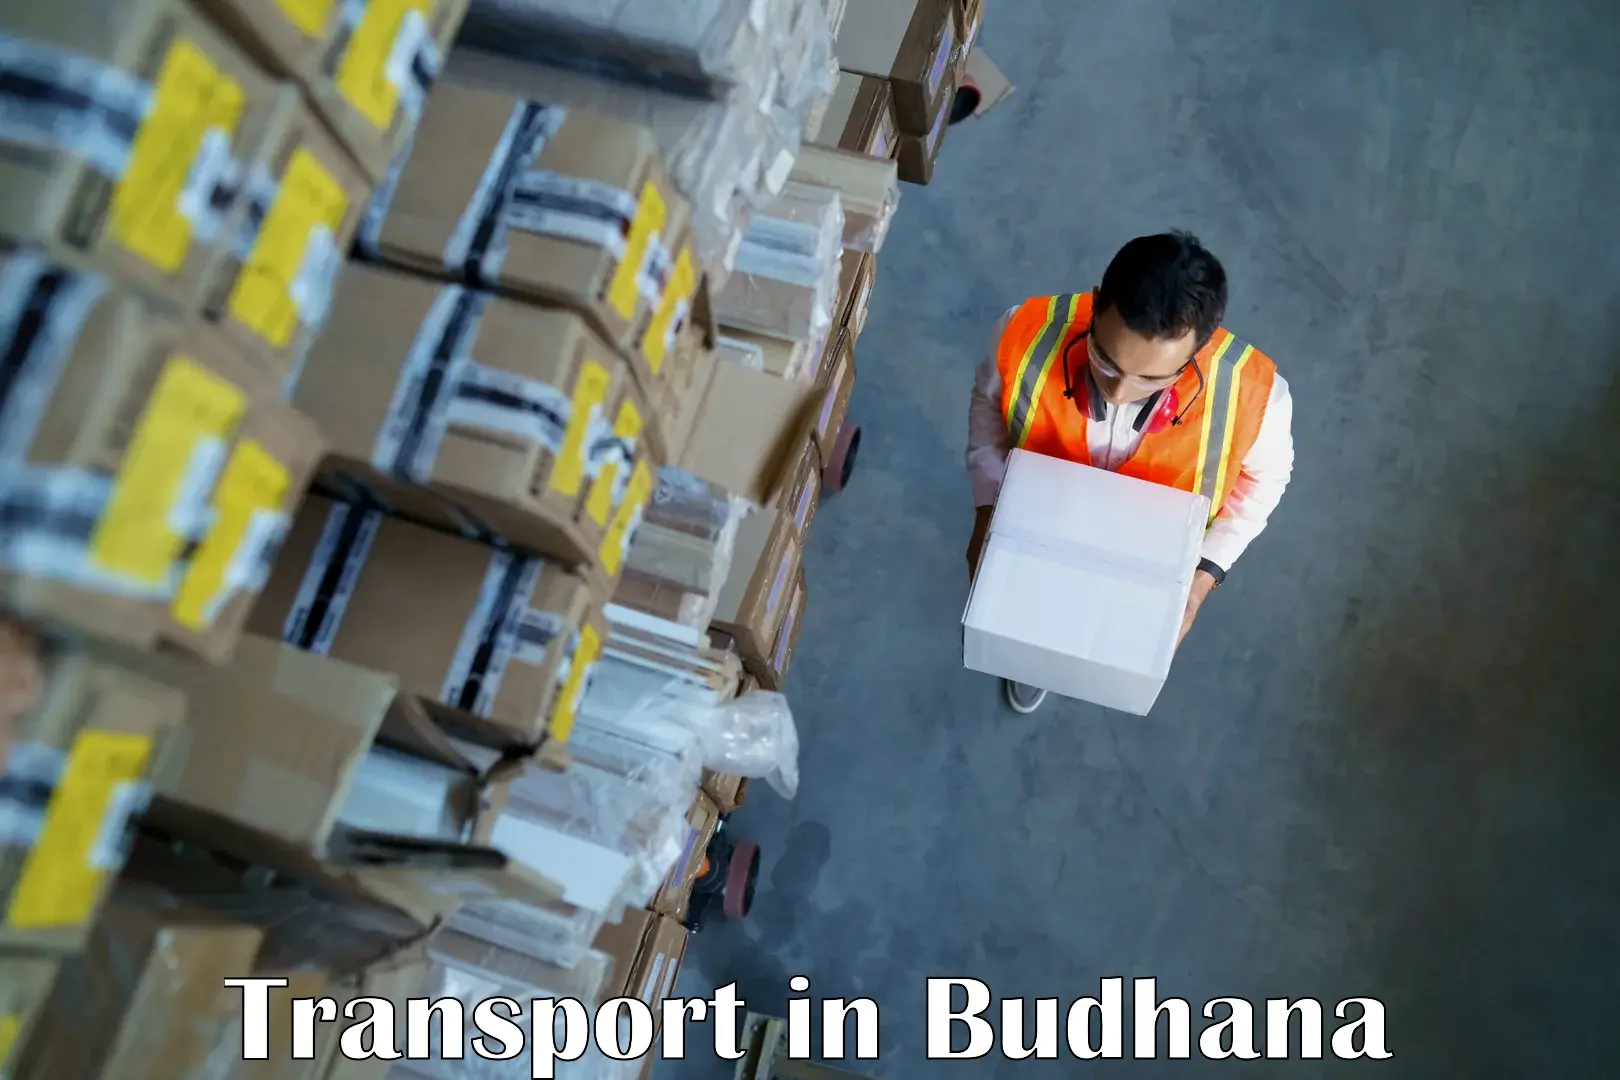 Cargo train transport services in Budhana